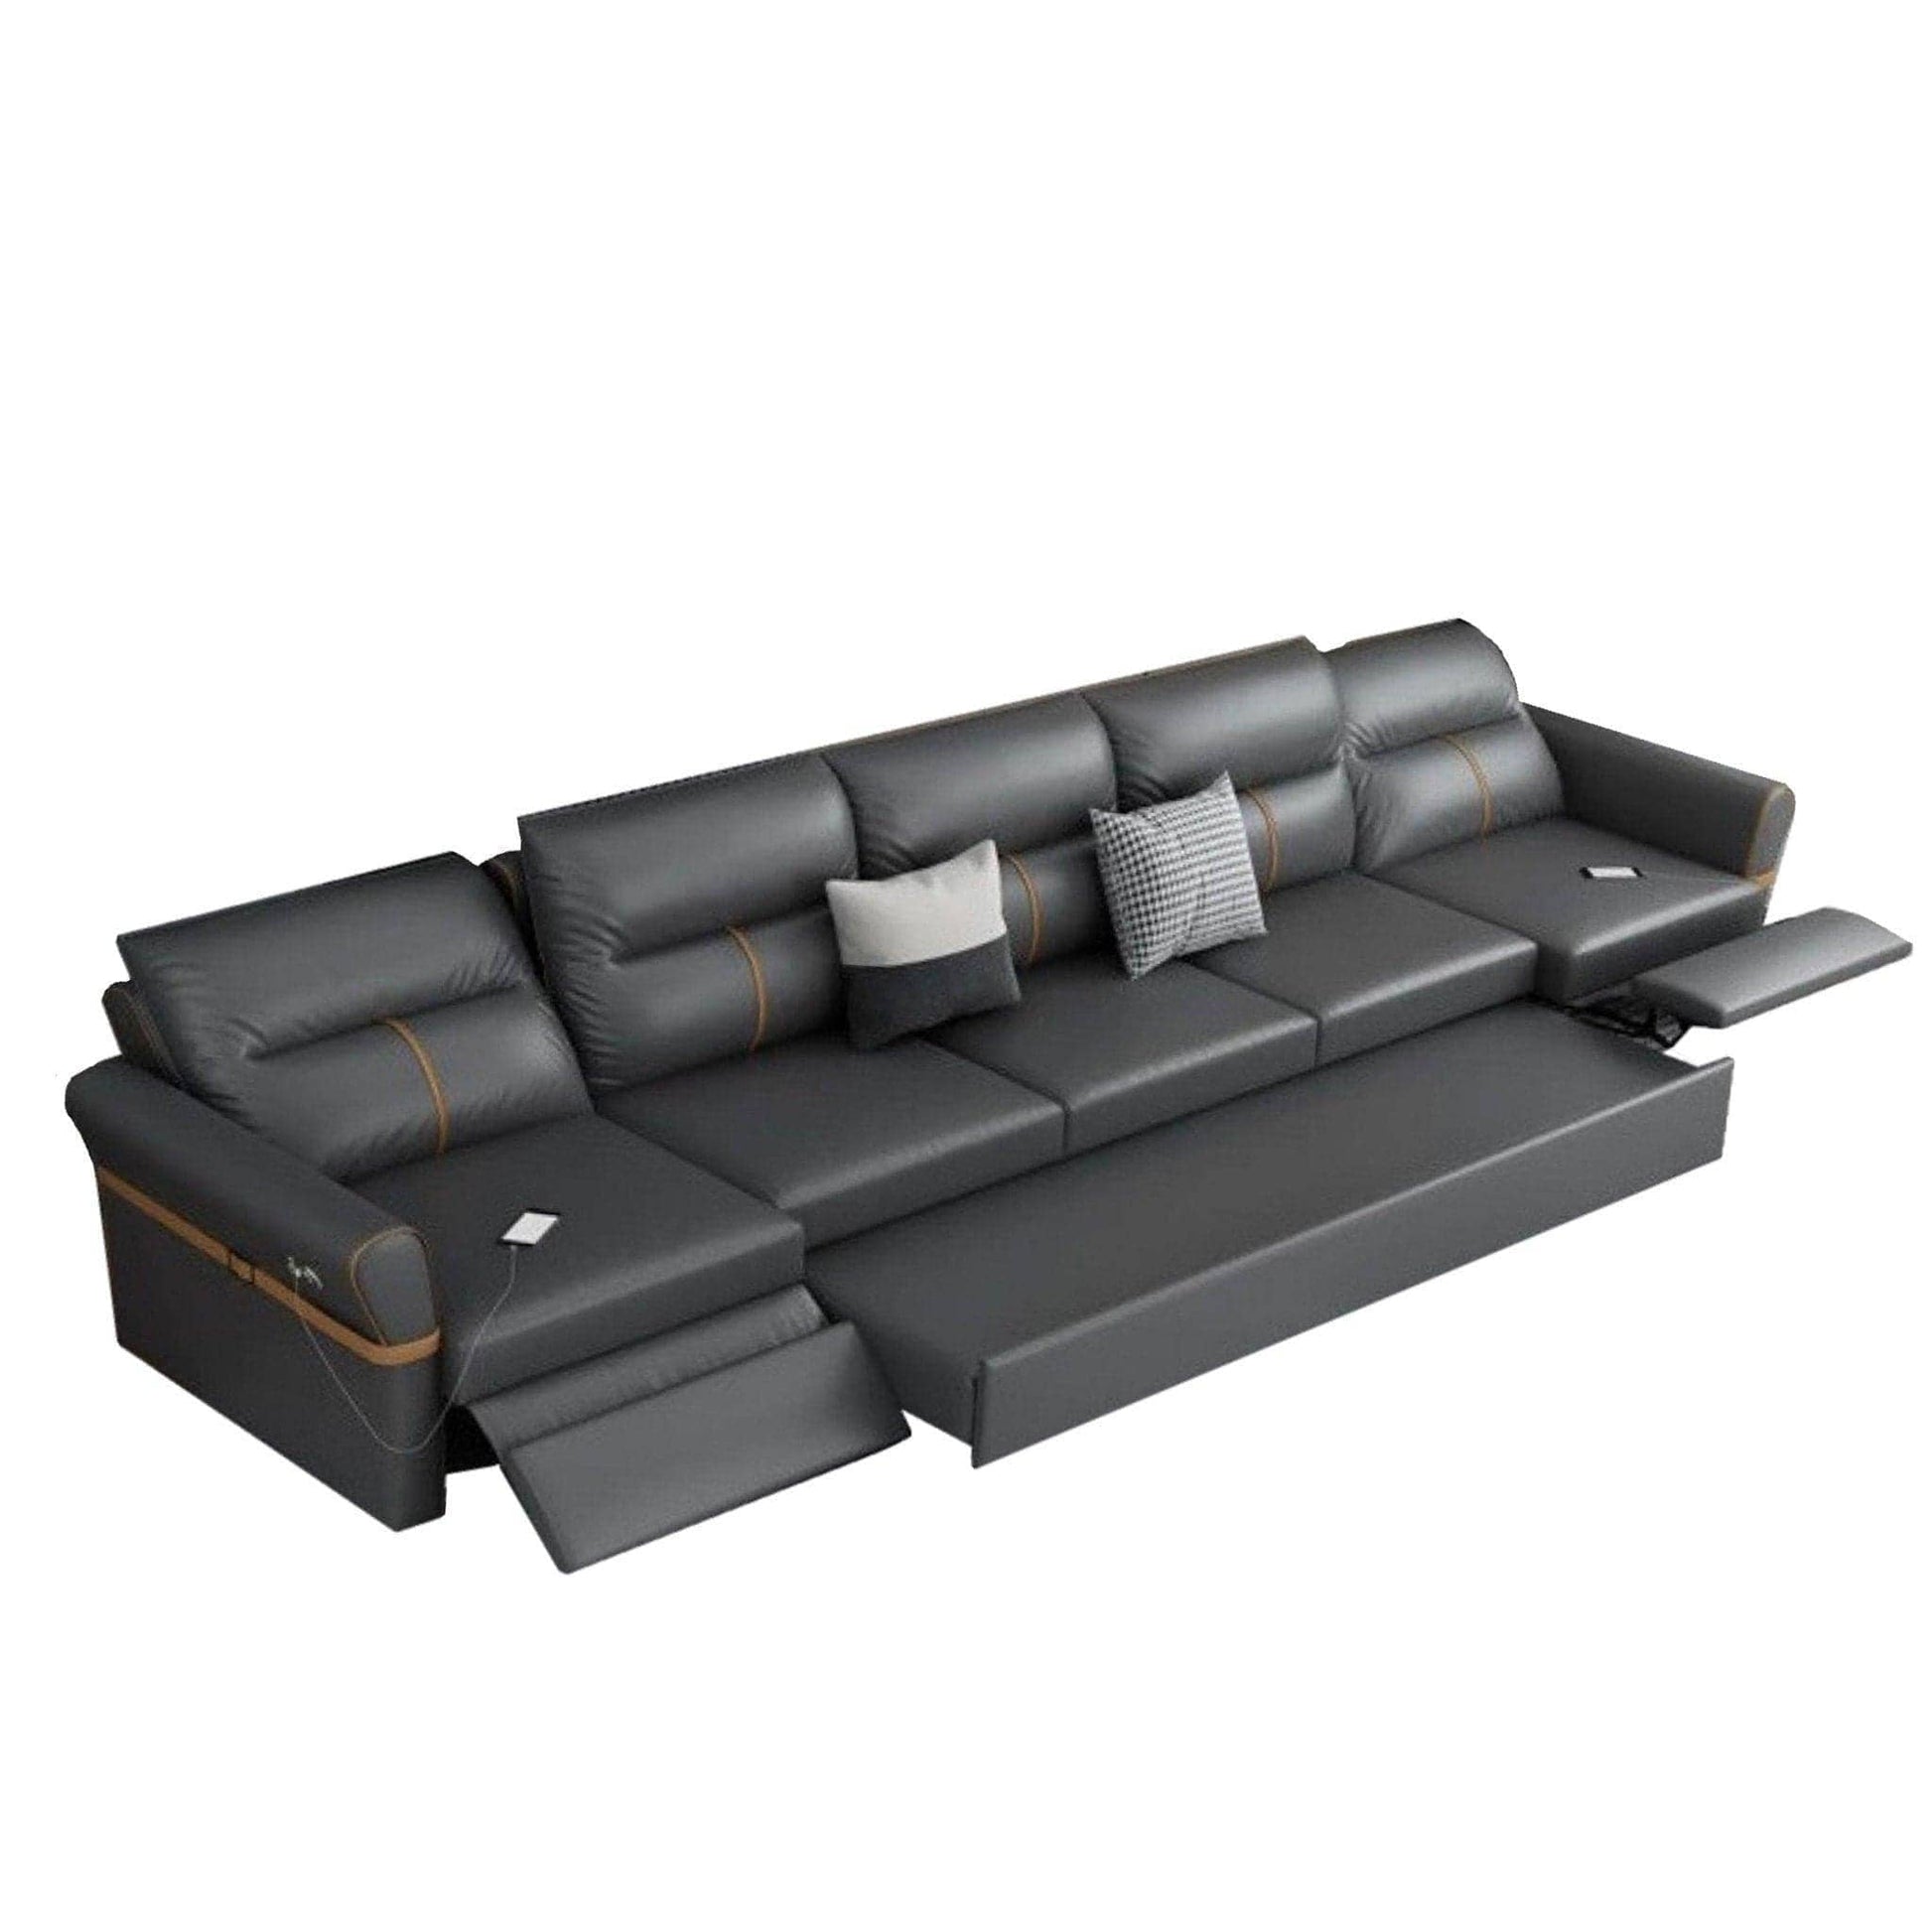 Cavern Electric Recliner Storage Sofa Bed Home Atelier